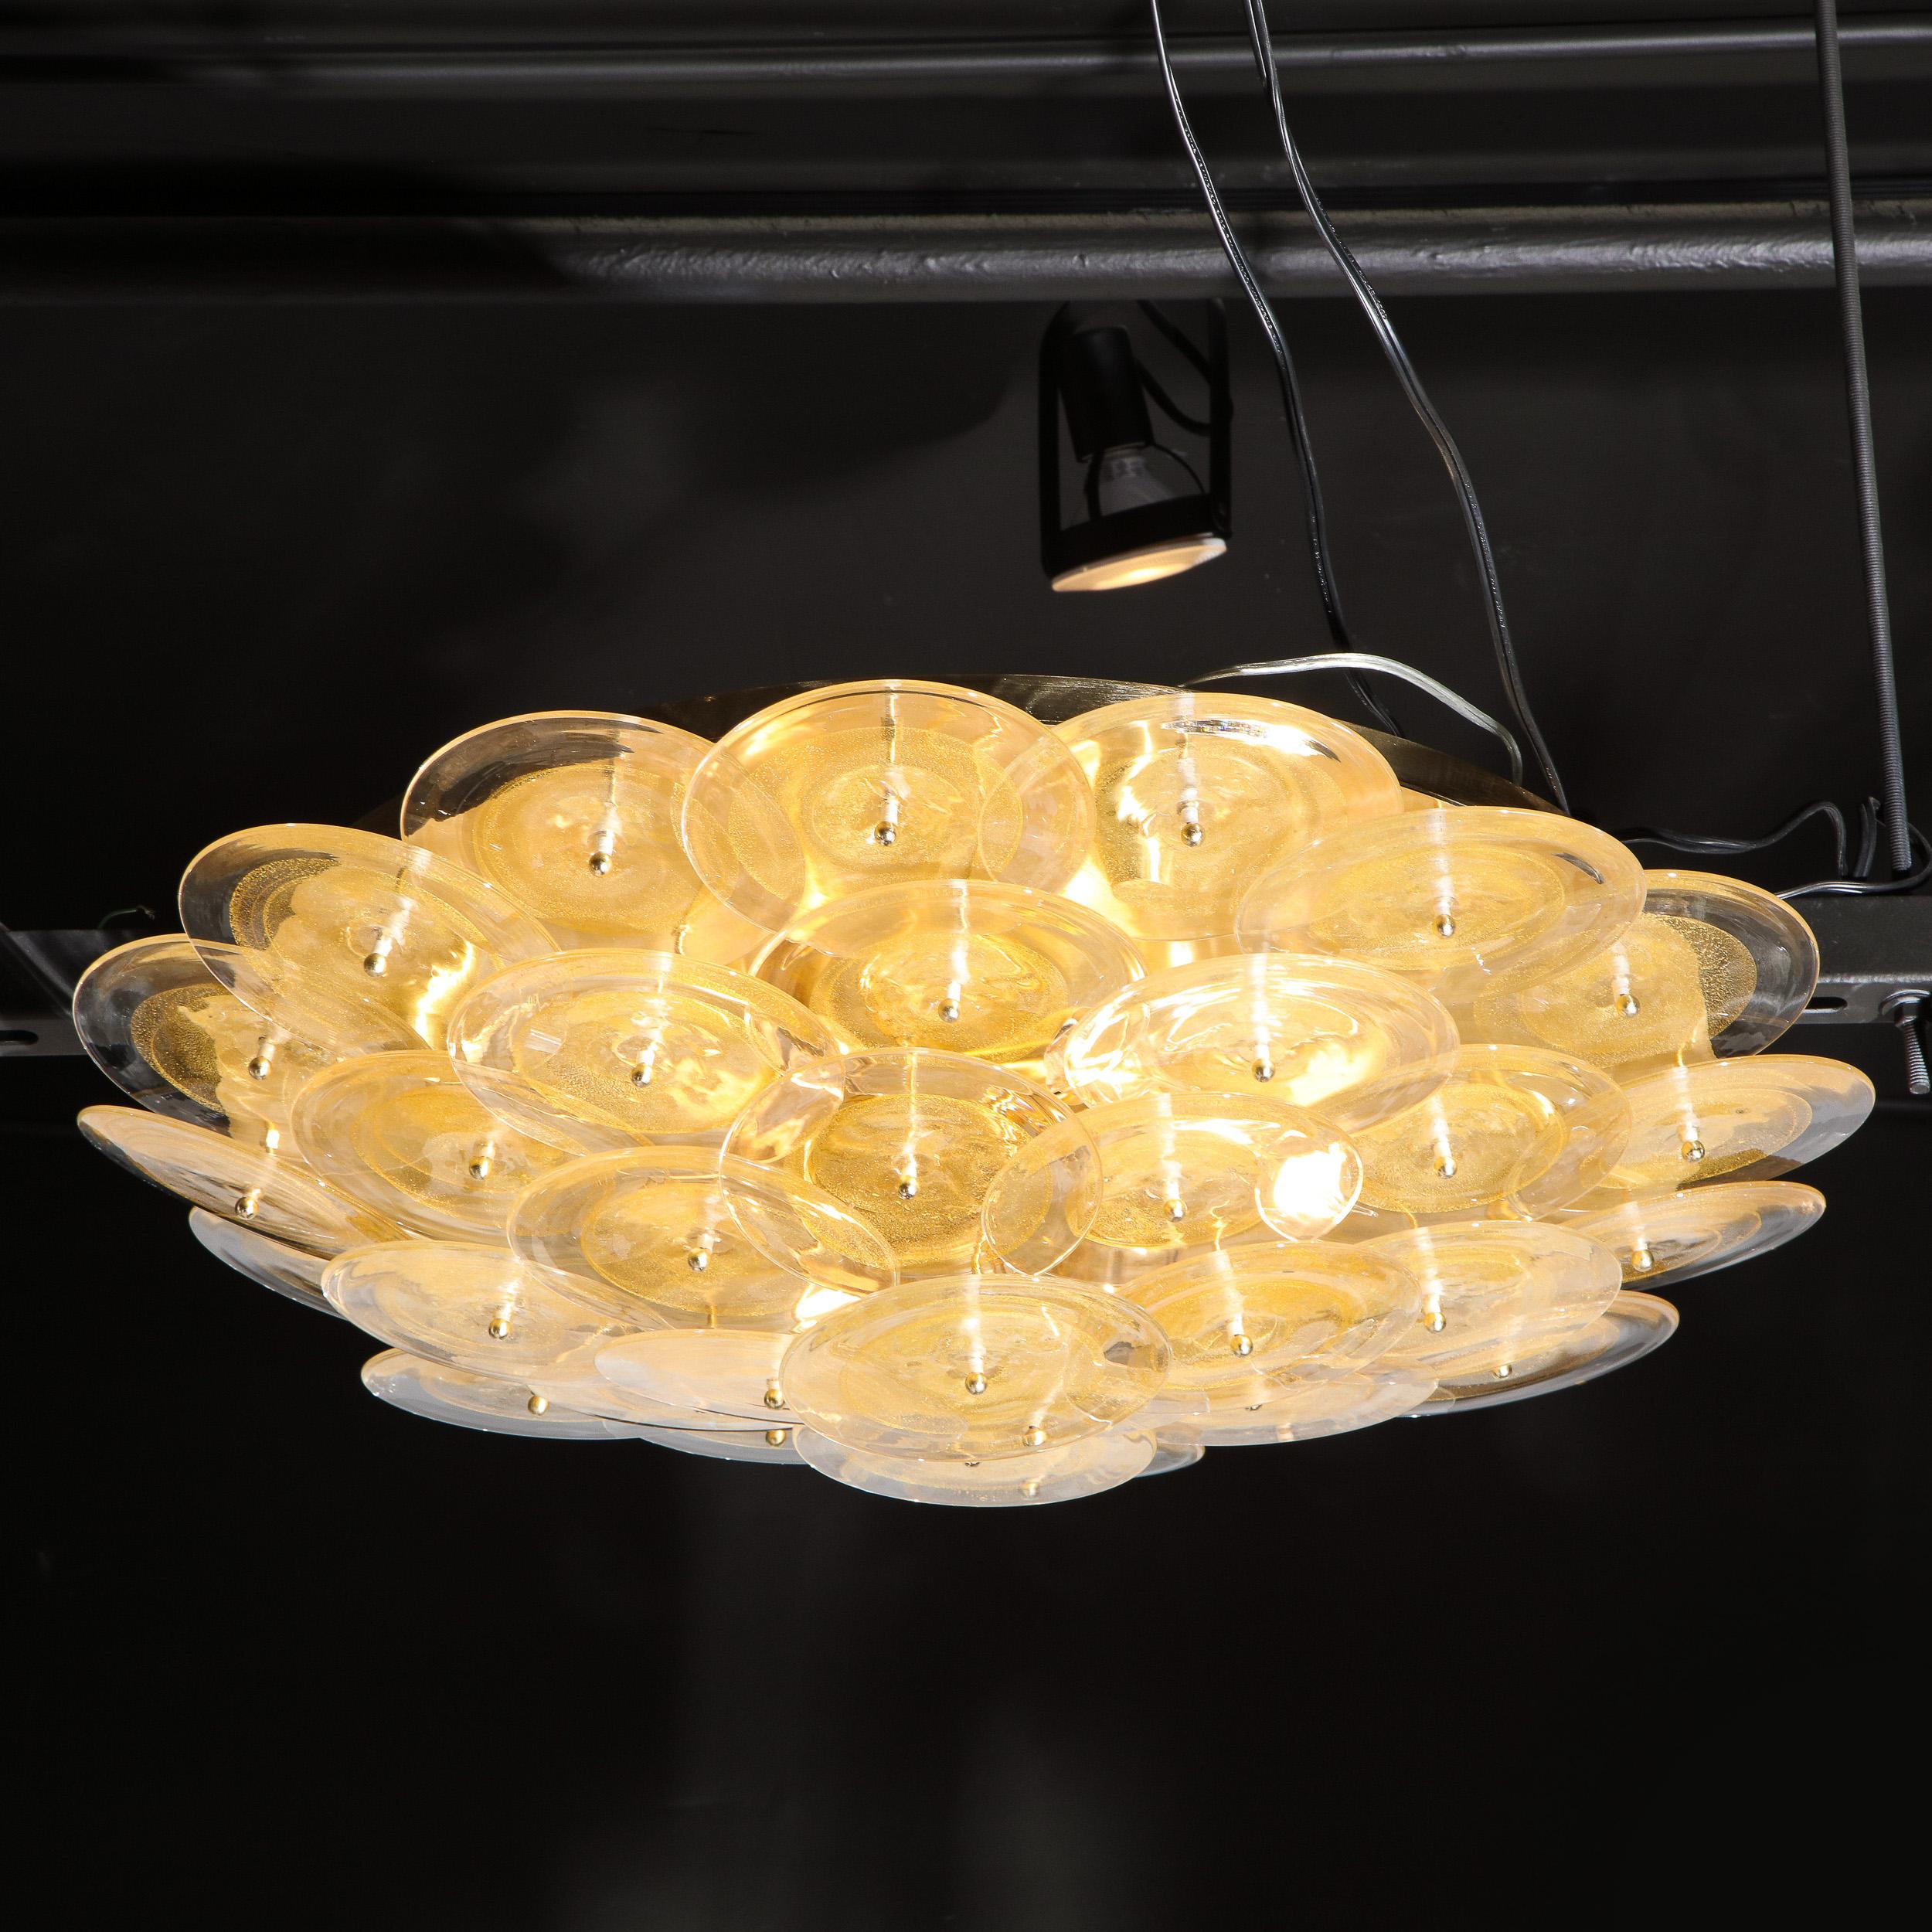 This handblown Murano chandelier is composed of an abundance of overlapping translucent Murano discs with 24kt yellow gold flecks attached to a polished brass base. The disks are connected to the base by brass rods, whose ends gently protrude